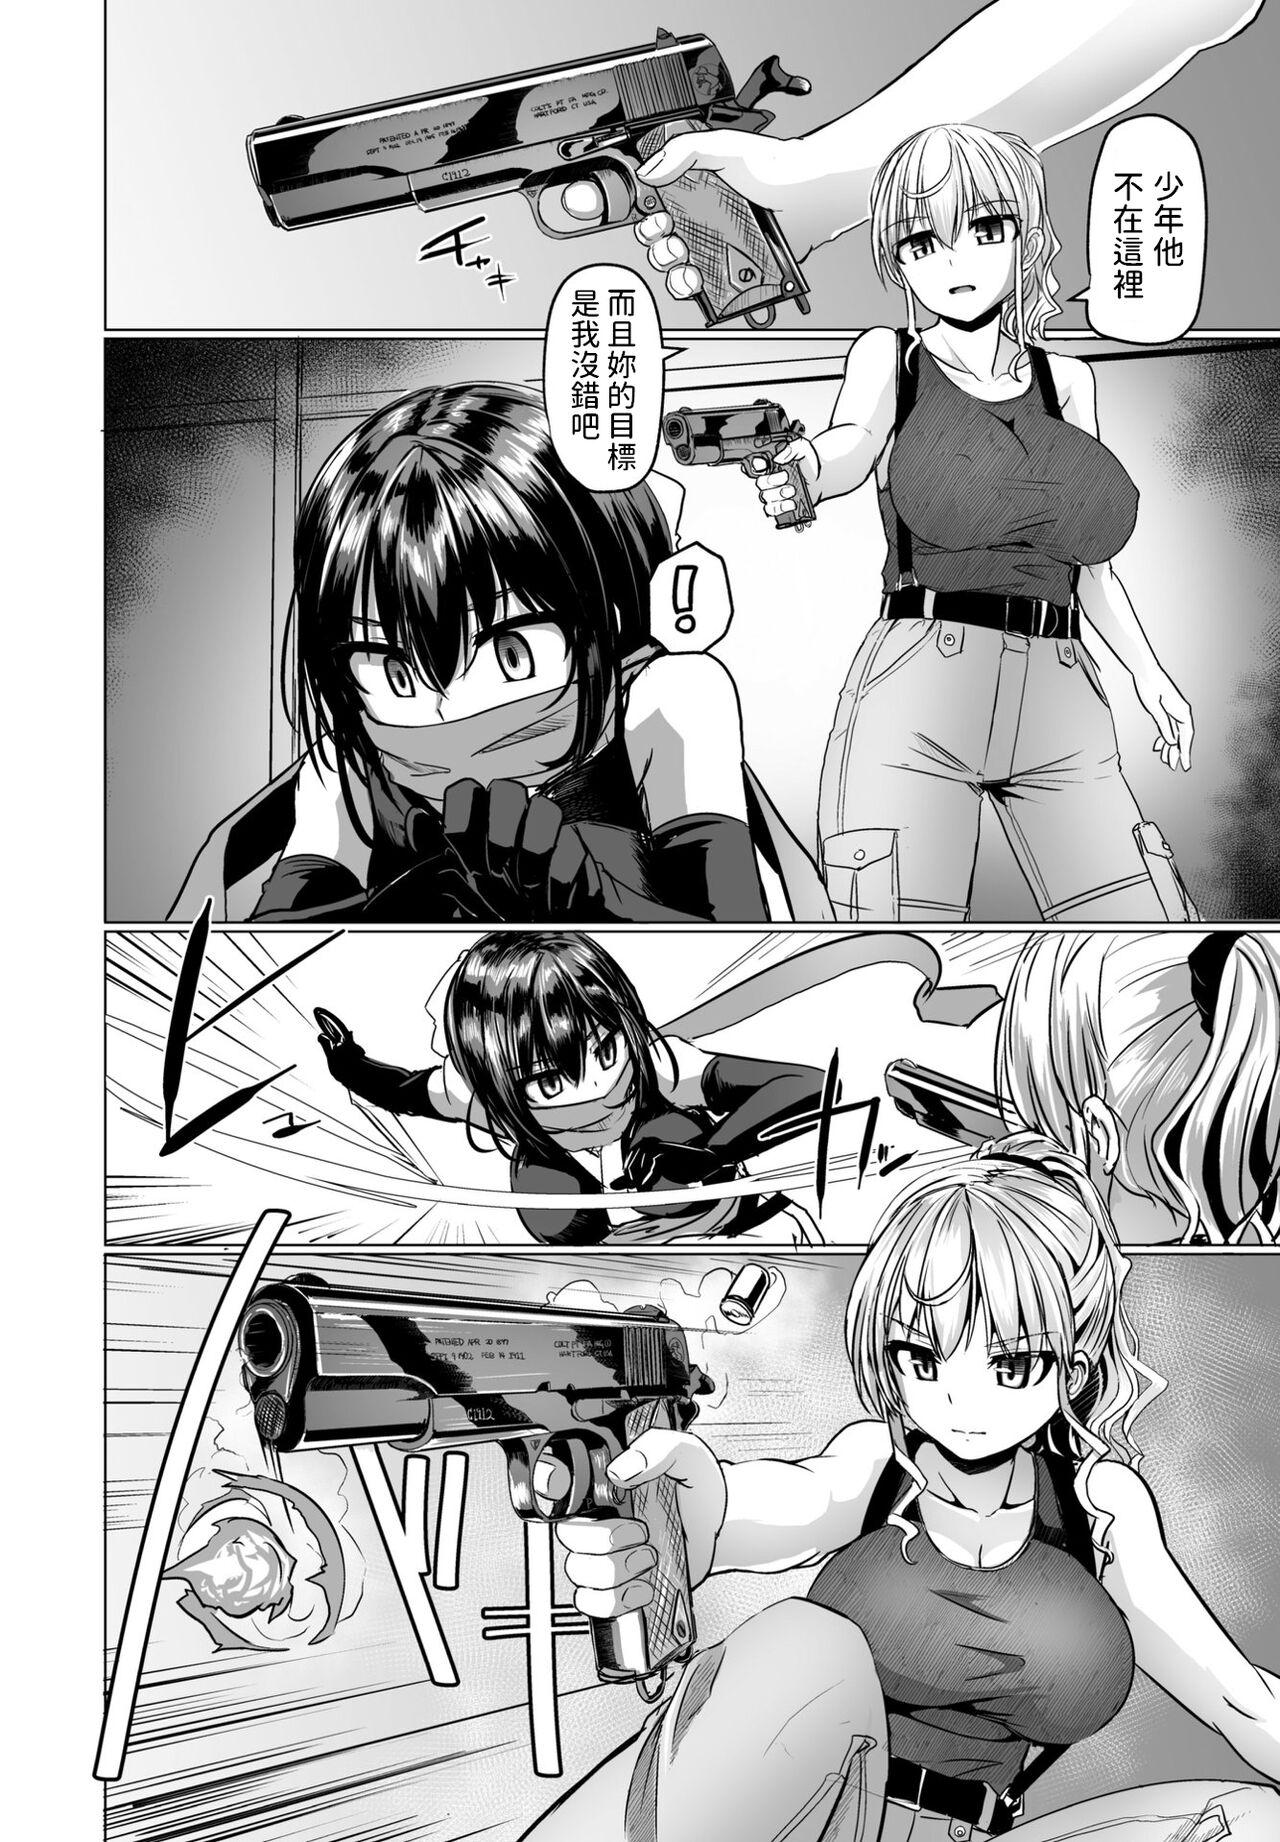 Russia THE NAKASEN DRIVER Ch. 3 Polla - Page 2